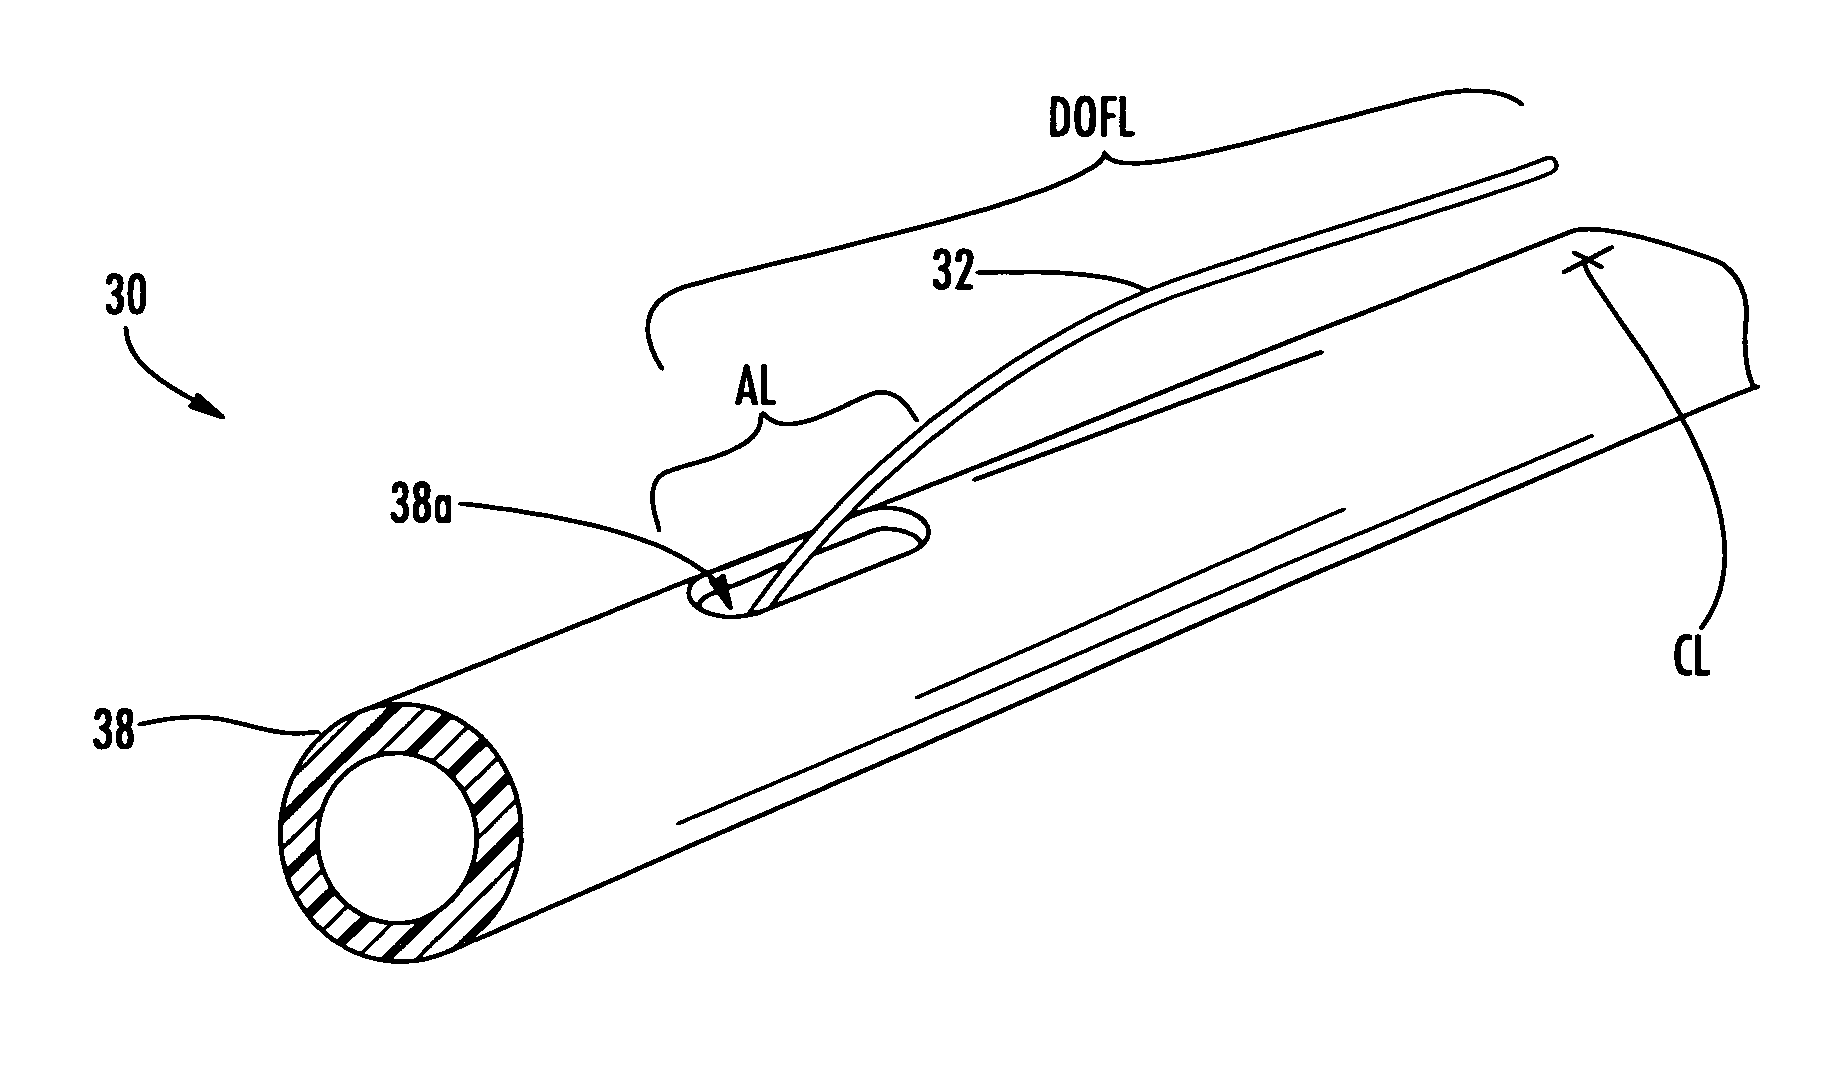 Methods for manufacturing fiber optic distribution cables